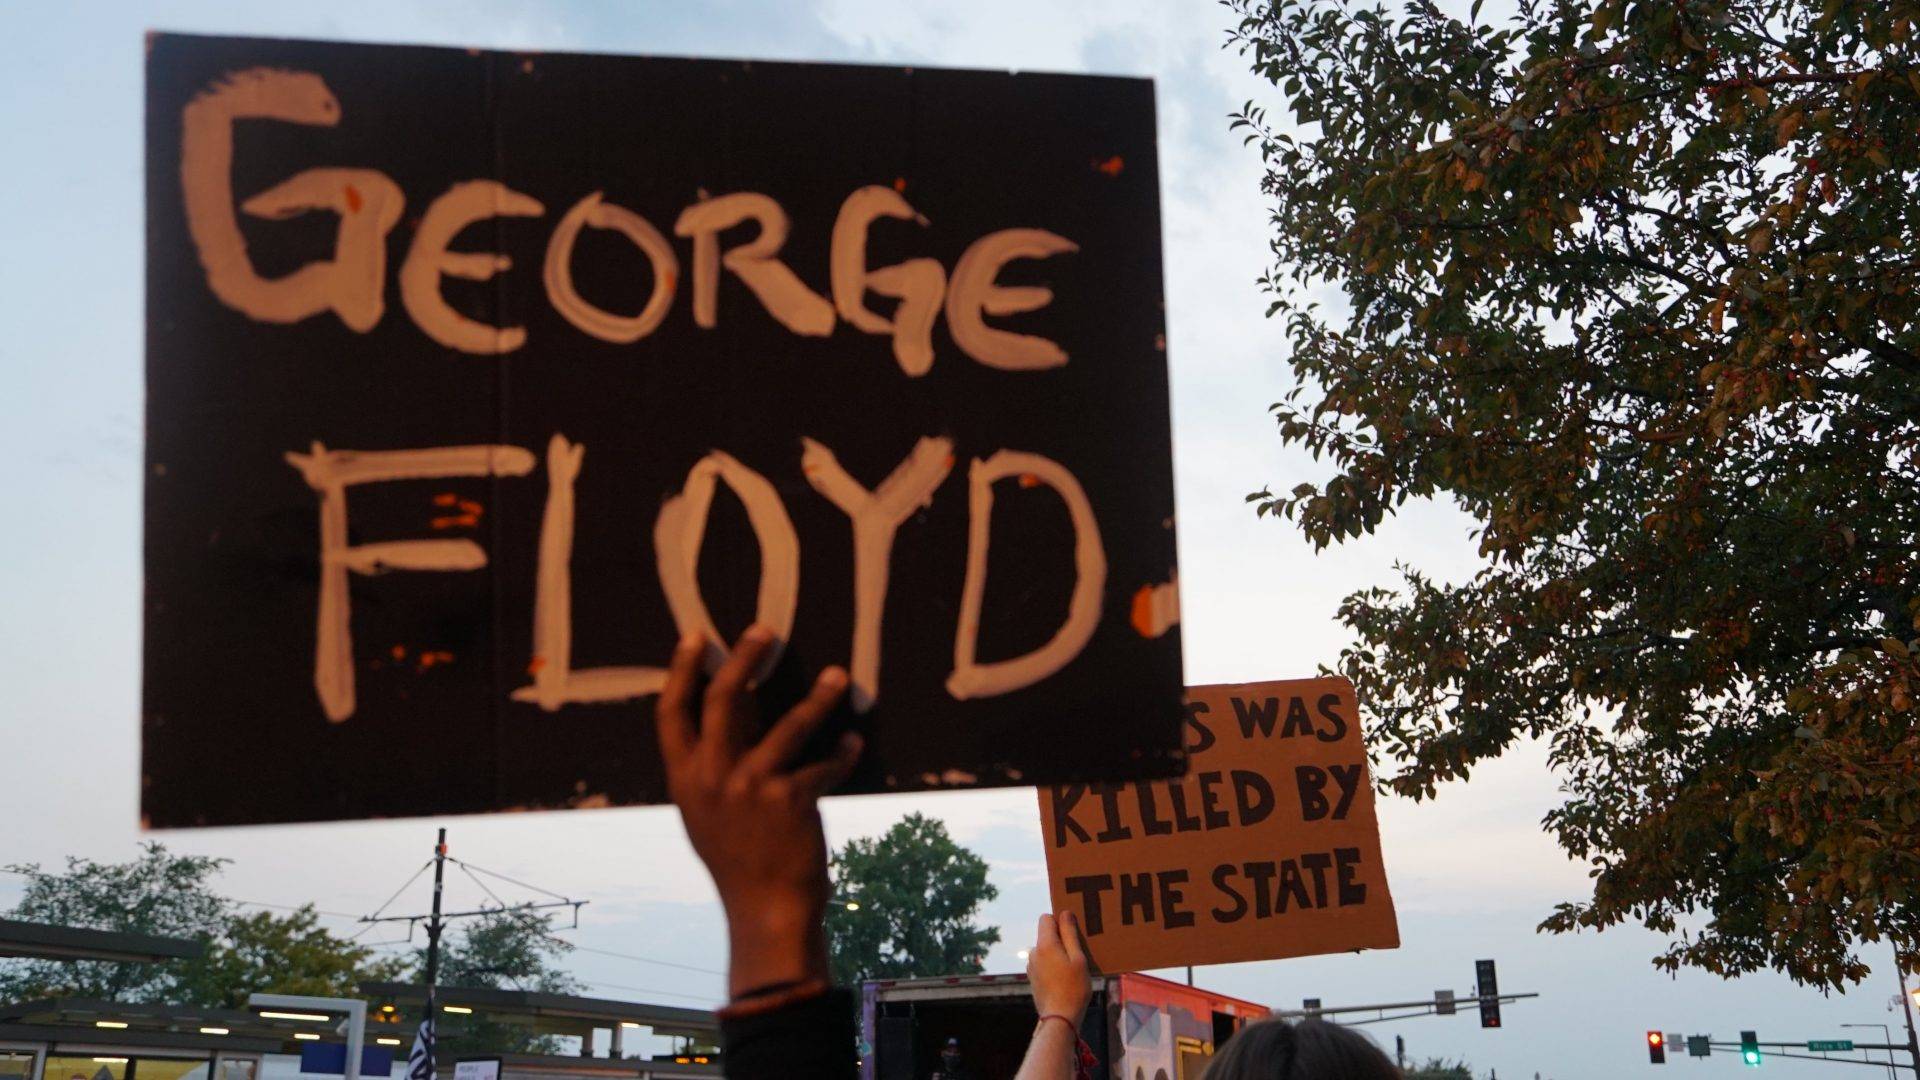 Protesters hold signs reading "George Floyd" and "Jesus was killed by the state" at a Sept. 23 Breonna Taylor rally in Minnesota